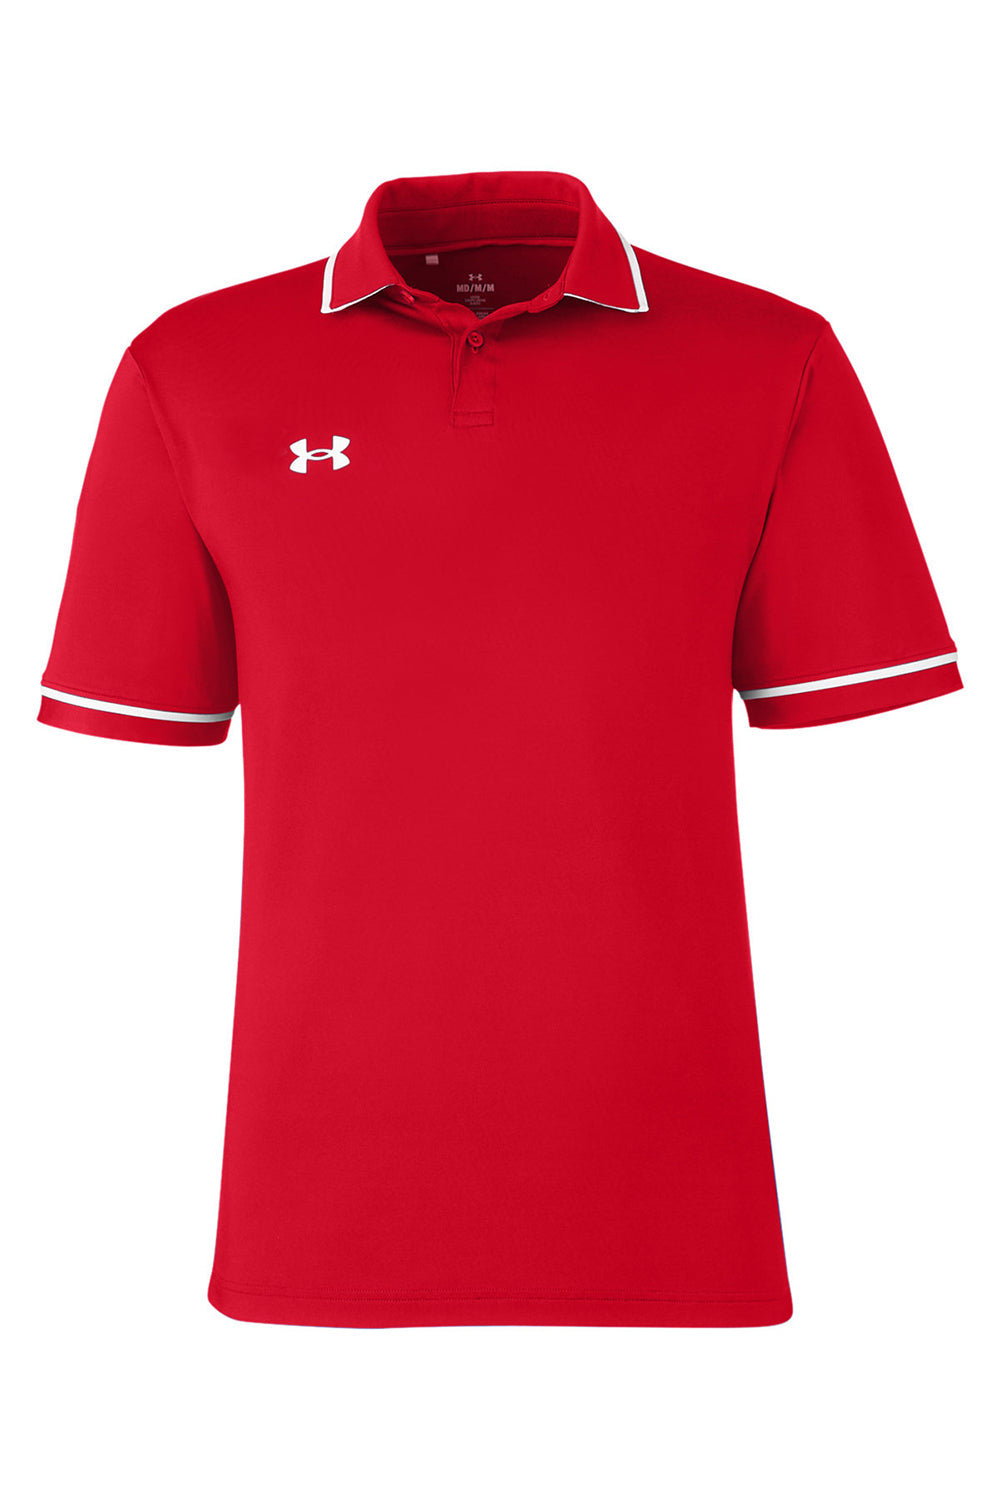 Under Armour 1376904 Mens Teams Performance Moisture Wicking Short Sleeve Polo Shirt Red Flat Front